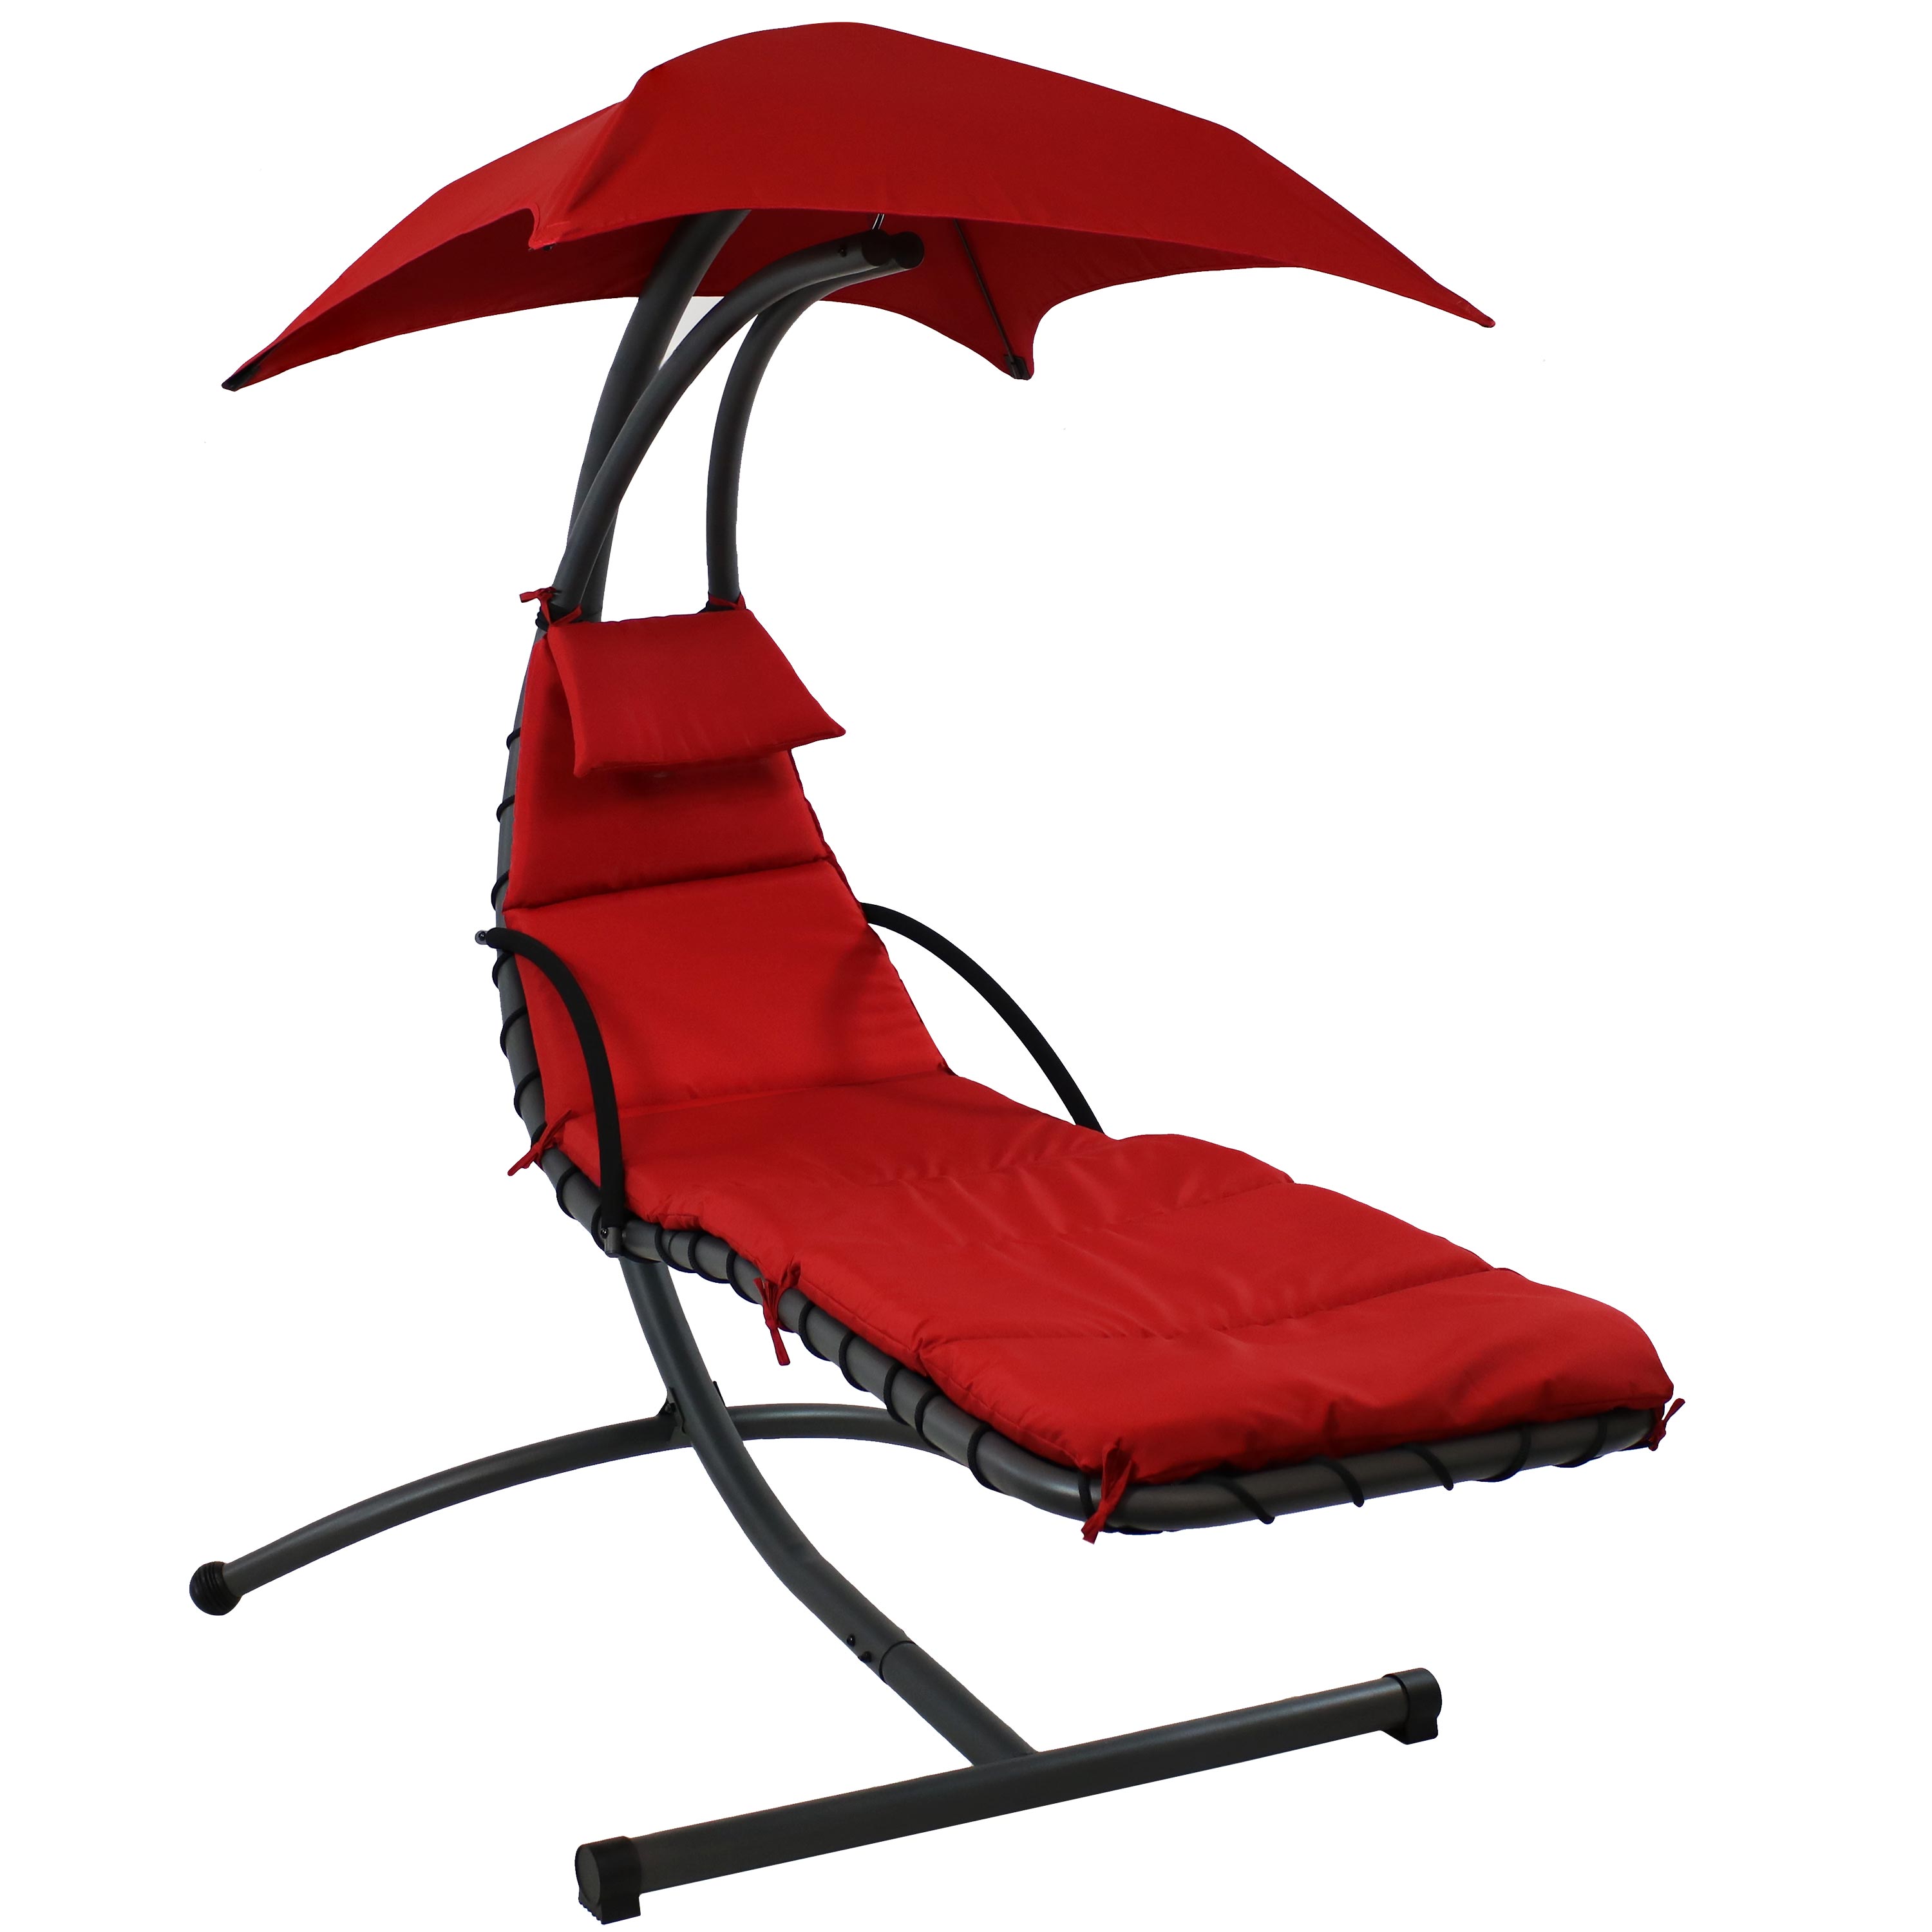 Sunnydaze Floating Chaise Lounge Chair, 260 Pound Capacity, Red